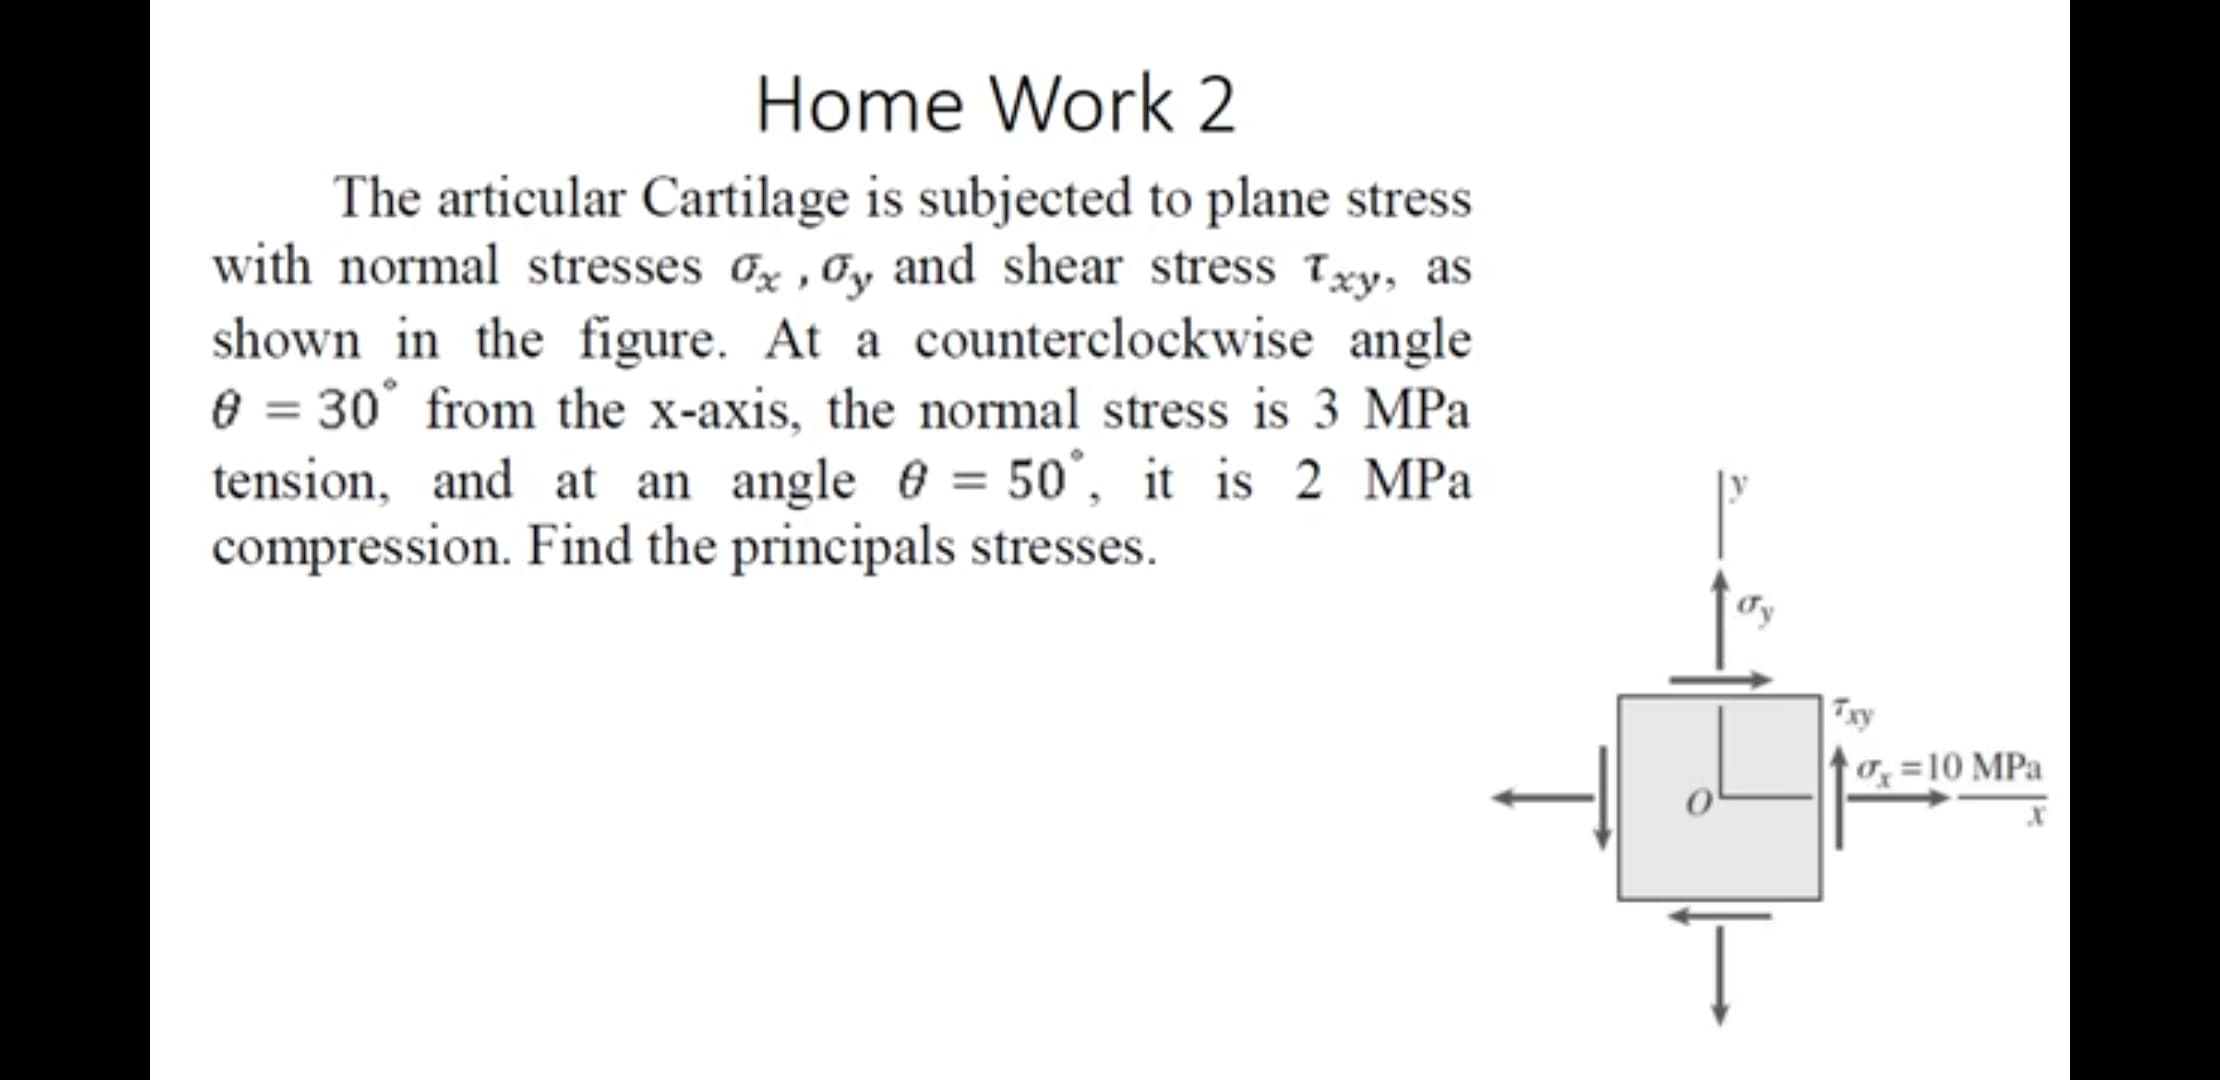 The articular Cartilage is subjected to plane stress
with normal stresses &x ,Oy and shear stress Txy, as
shown in the figure. At a counterclockwise angle
e = 30° from the x-axis, the normal stress is 3 MPa
tension, and at an angle 6 = 50°, it is 2 MPa
compression. Find the principals stresses.
Ty
0, =10 MPa
